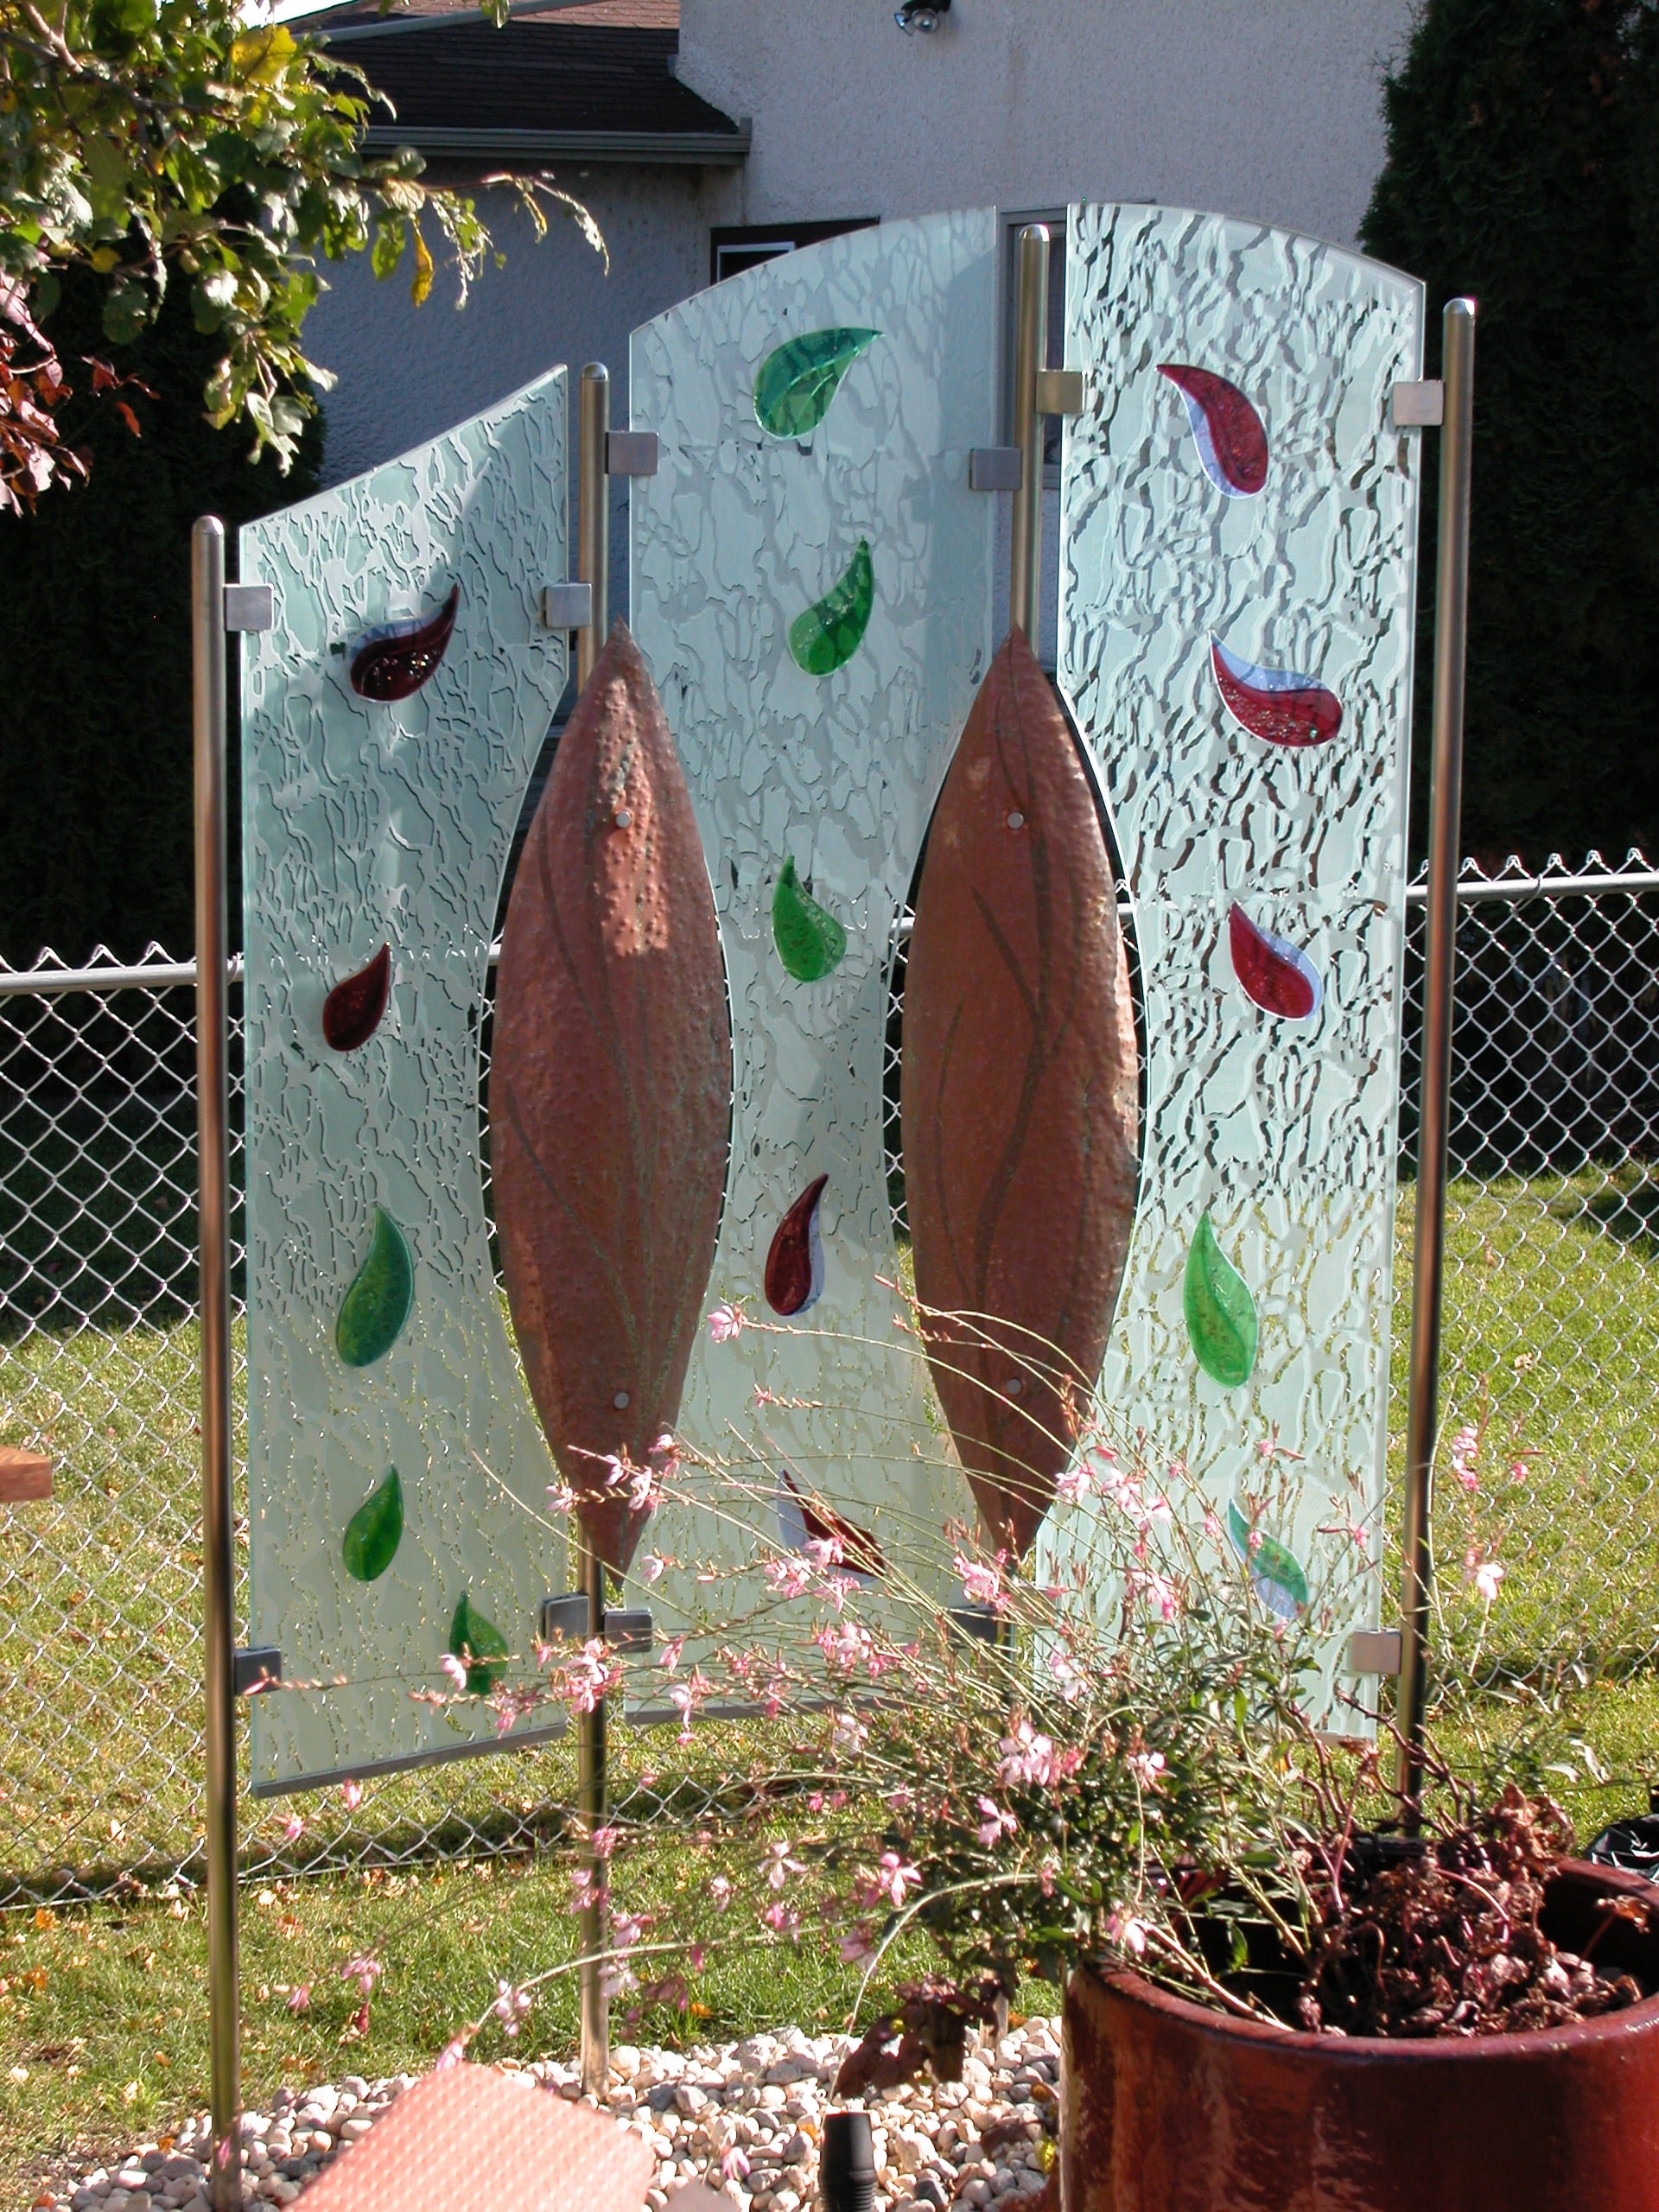 Transferring Pattern Shapes onto Glass